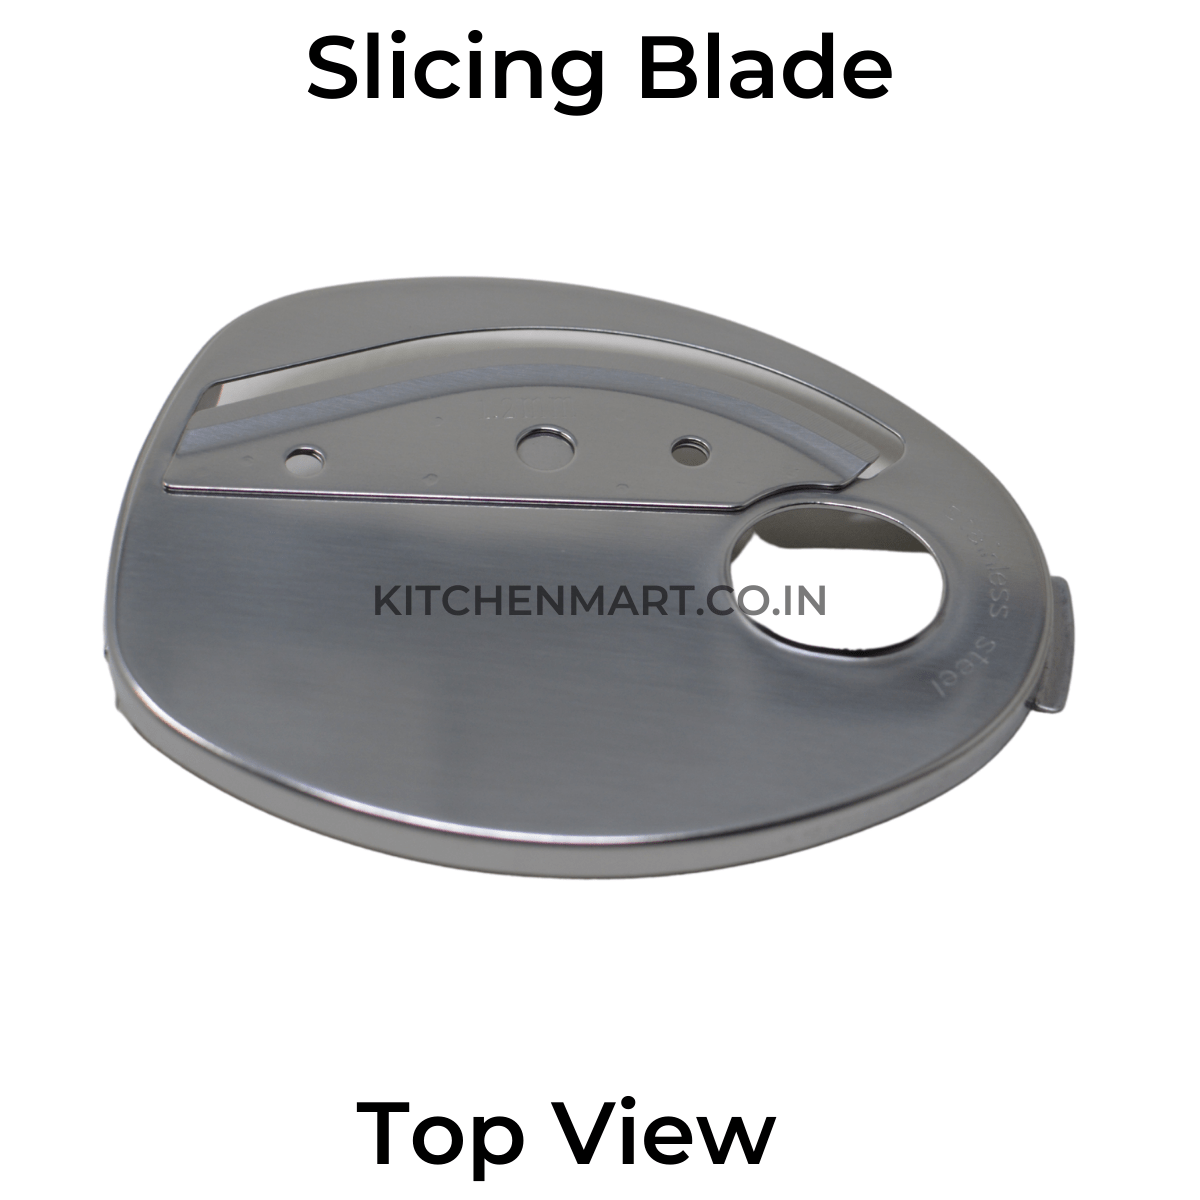 Slicing Blade attachment suitable for Preethi Zodiac Mixer Grinder (2.4 mm thickness) - KITCHEN MART